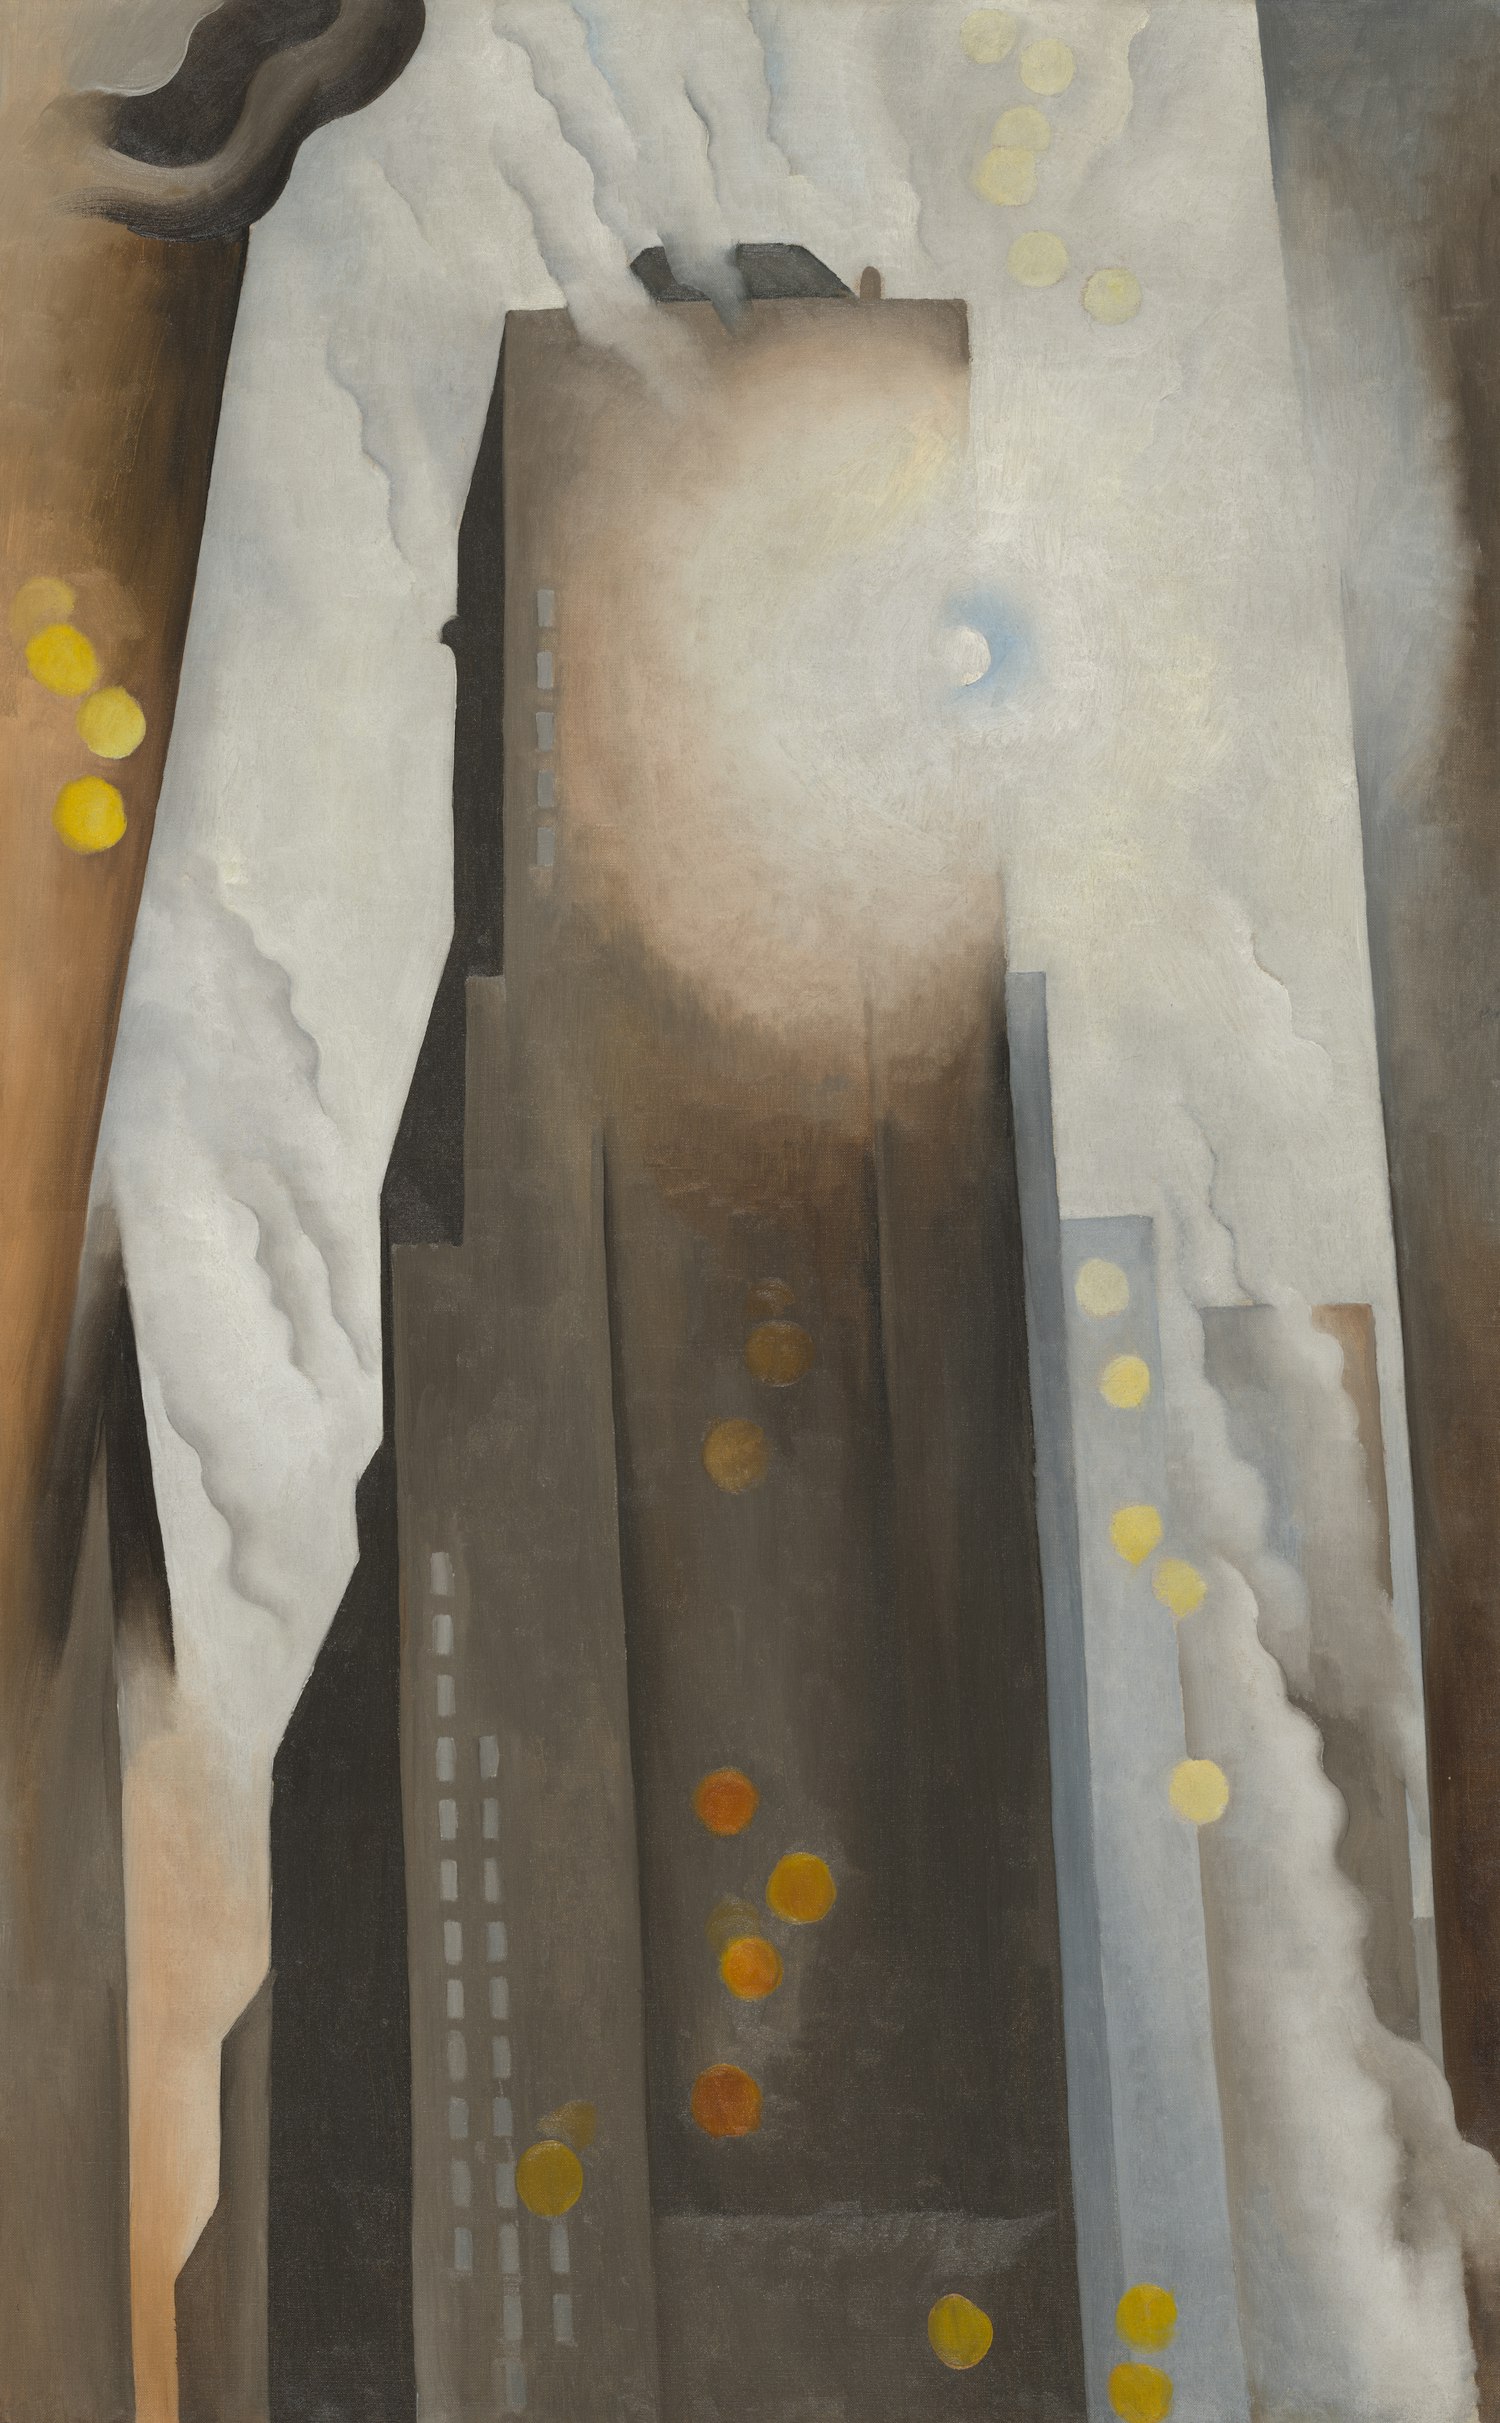 Georgia O’Keeffe: “My New Yorks” | The Art Institute of Chicago